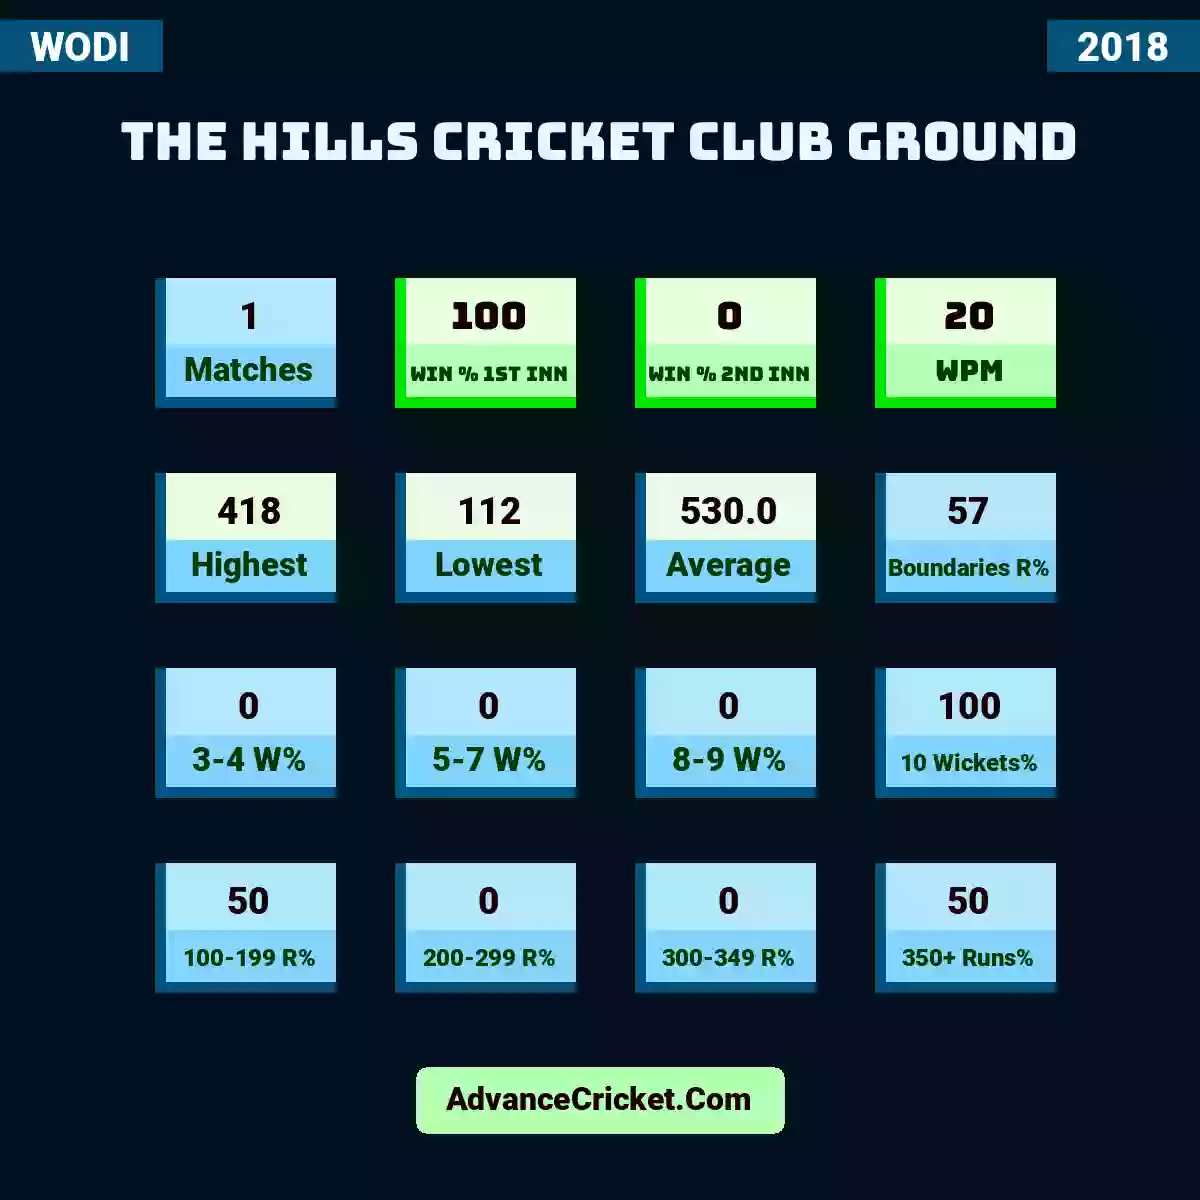 Image showing The Hills Cricket Club Ground with Matches: 1, Win % 1st Inn: 100, Win % 2nd Inn: 0, WPM: 20, Highest: 418, Lowest: 112, Average: 530.0, Boundaries R%: 57, 3-4 W%: 0, 5-7 W%: 0, 8-9 W%: 0, 10 Wickets%: 100, 100-199 R%: 50, 200-299 R%: 0, 300-349 R%: 0, 350+ Runs%: 50.